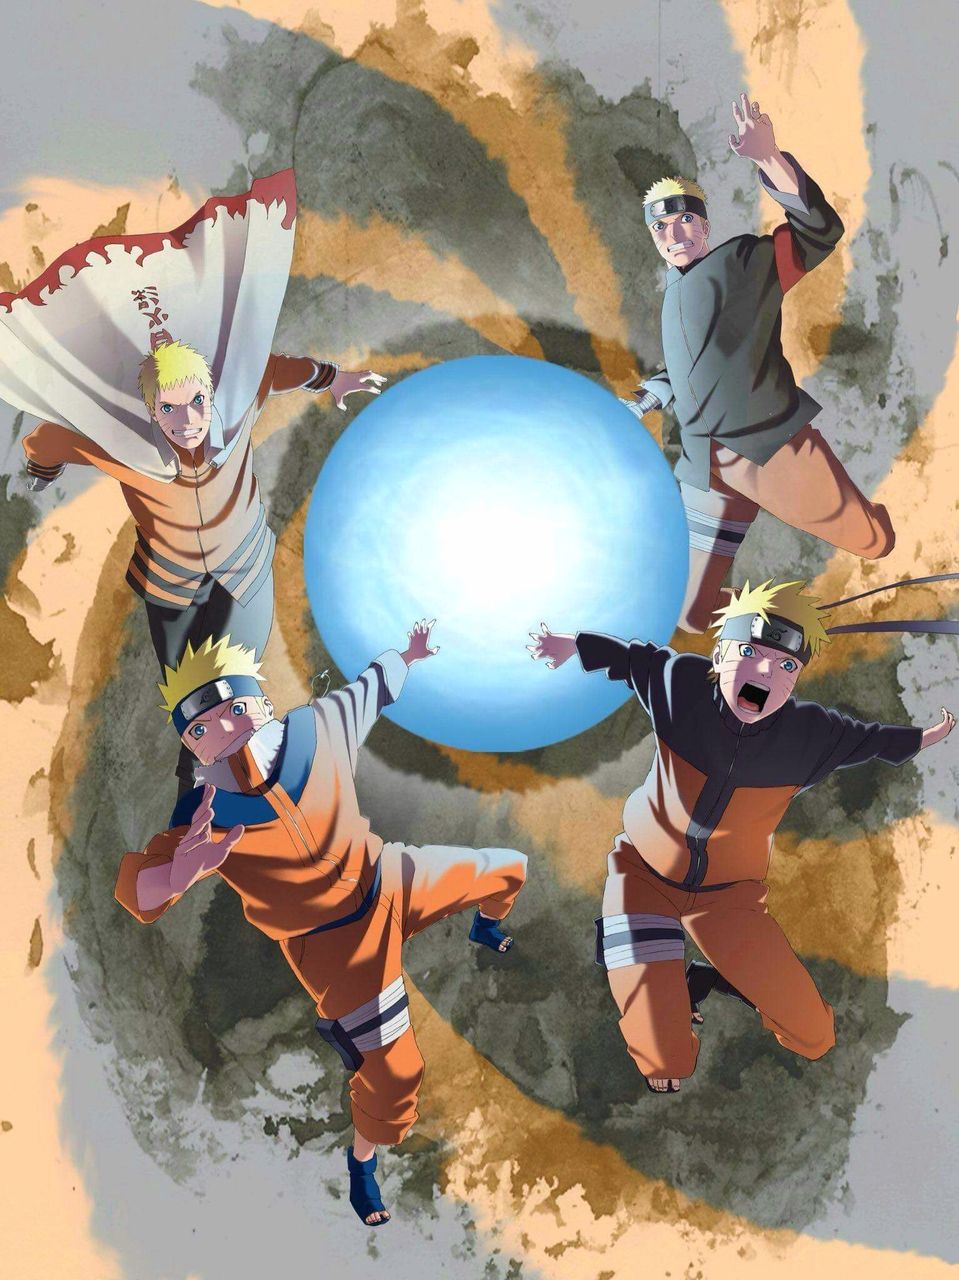 This is a great picture. The NARUTO evolution through out the years. It just looks amazing. I remember drawing something like this long ago. I legit made this my phone wallpaper once